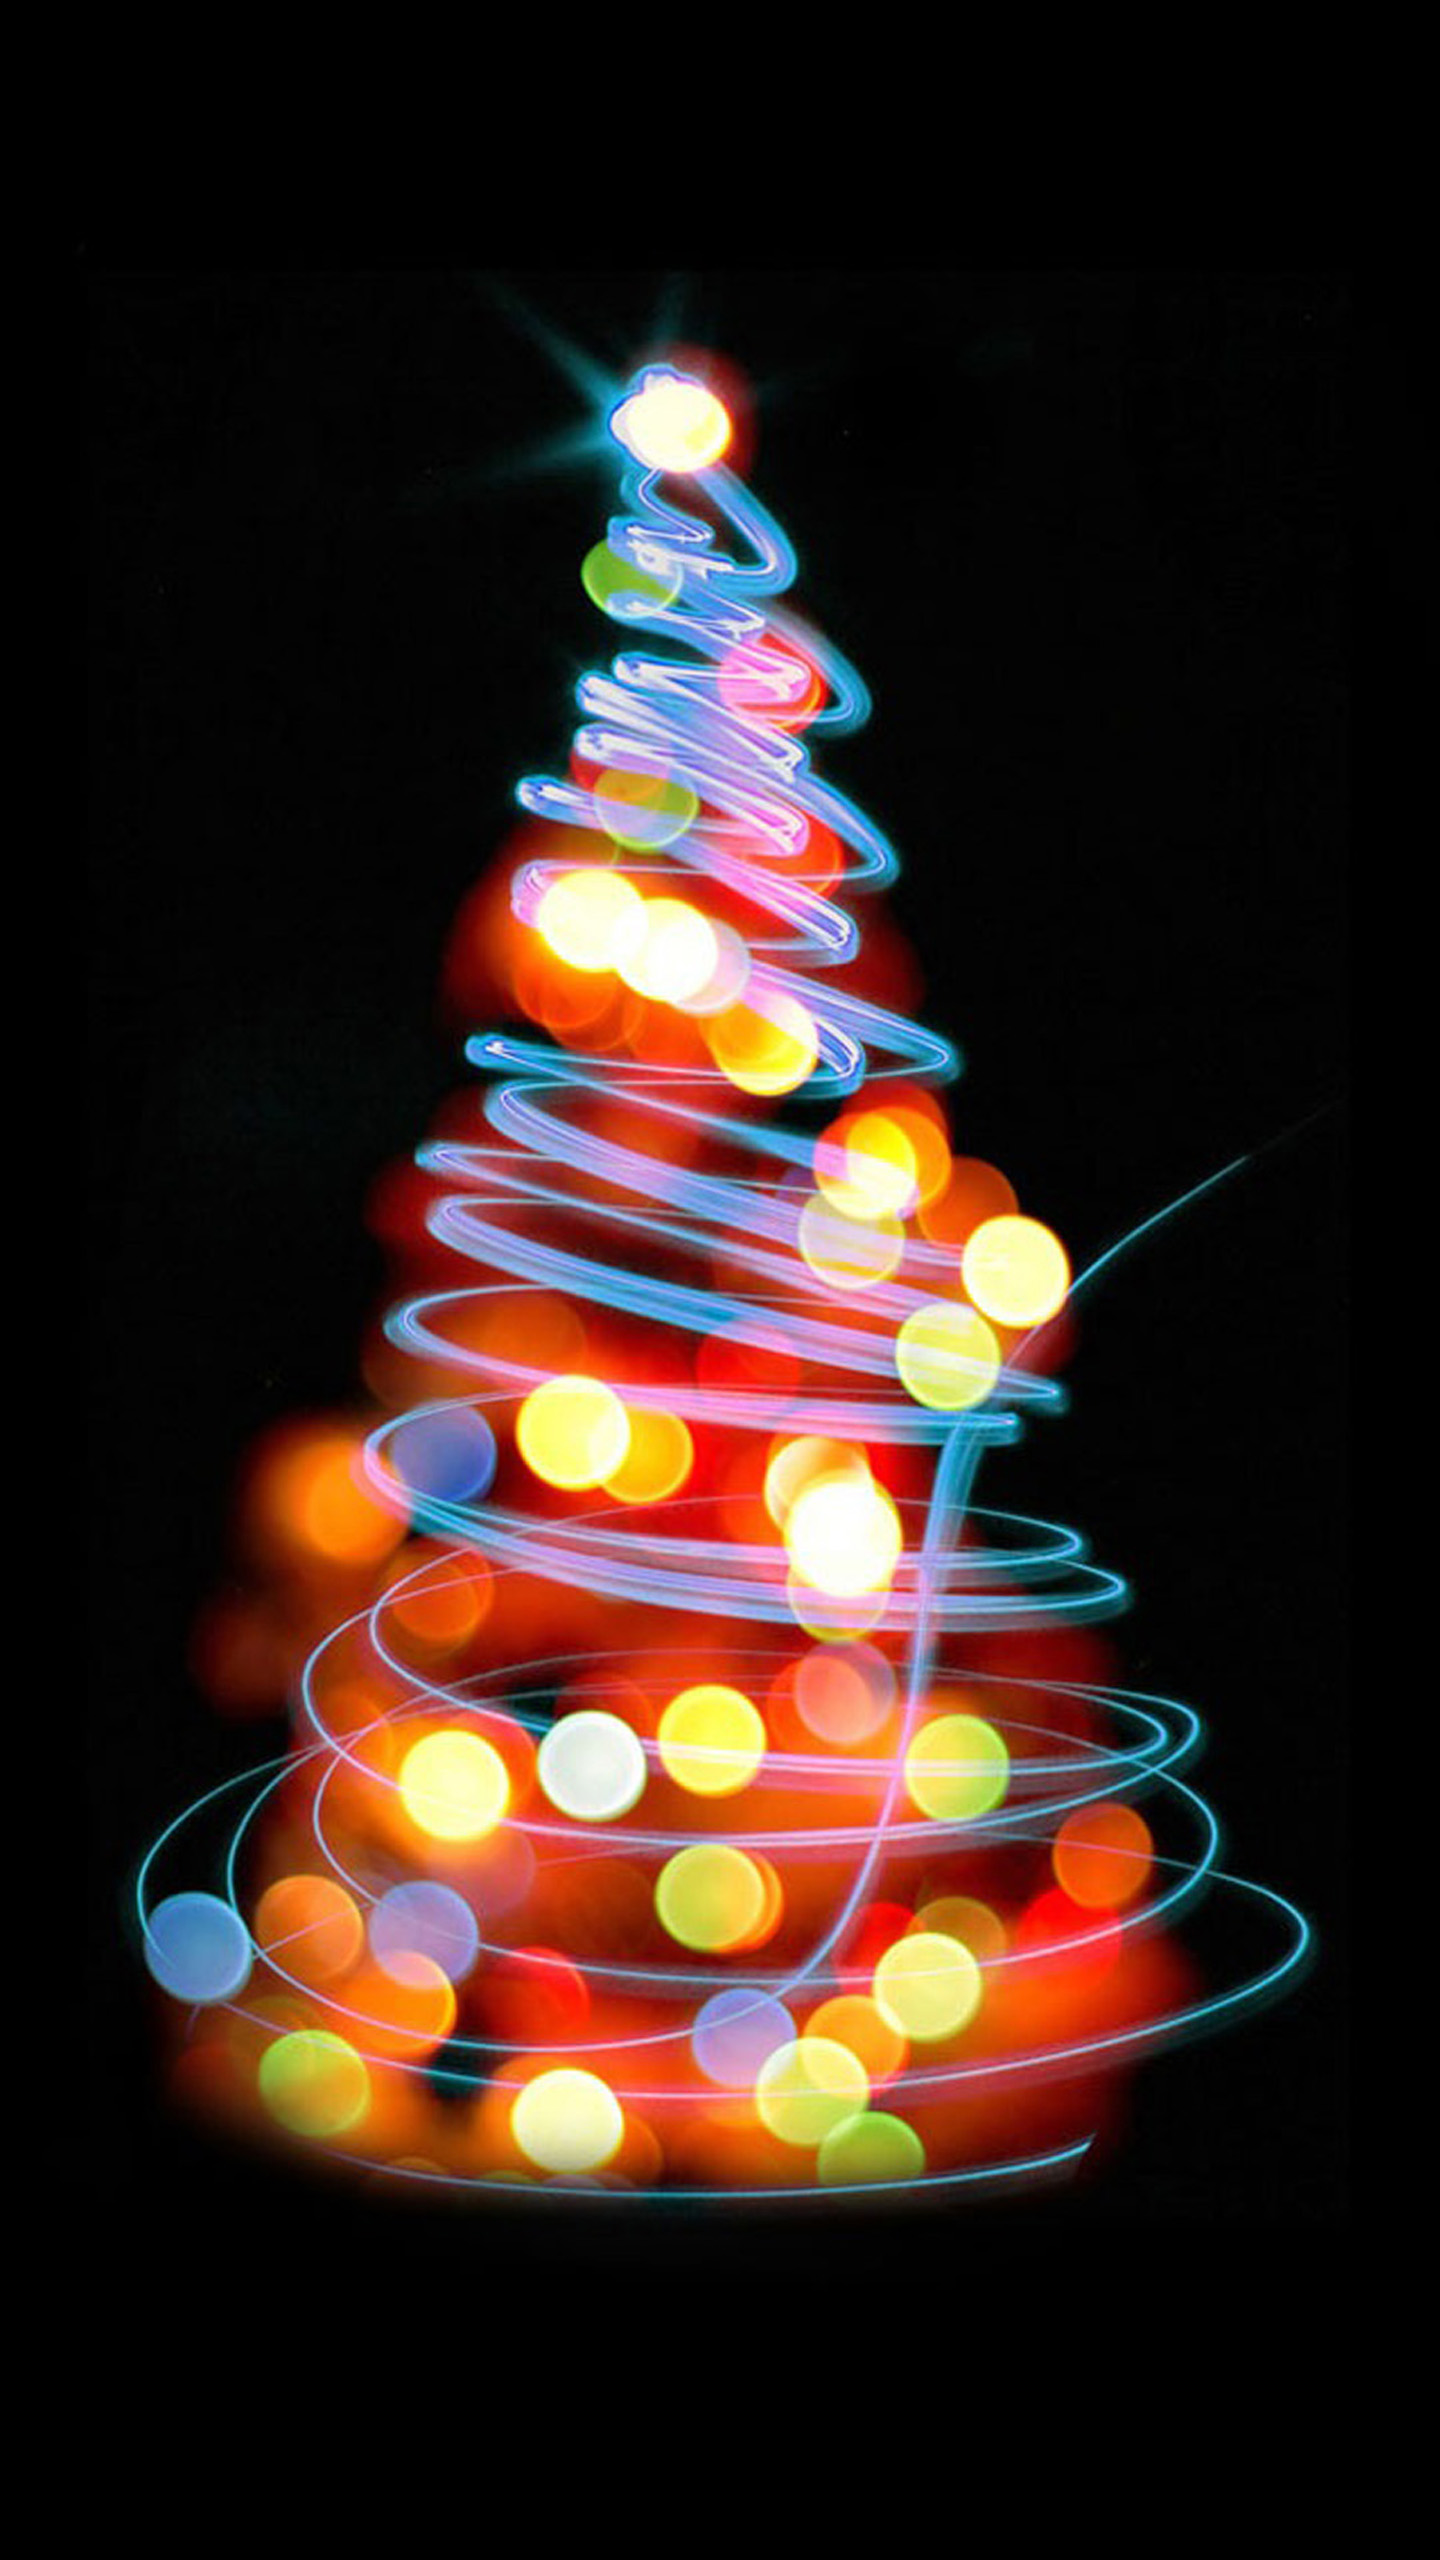 Samsung Galaxy S4 Active Wallpaper: Christmas Twister Android Wallpaper